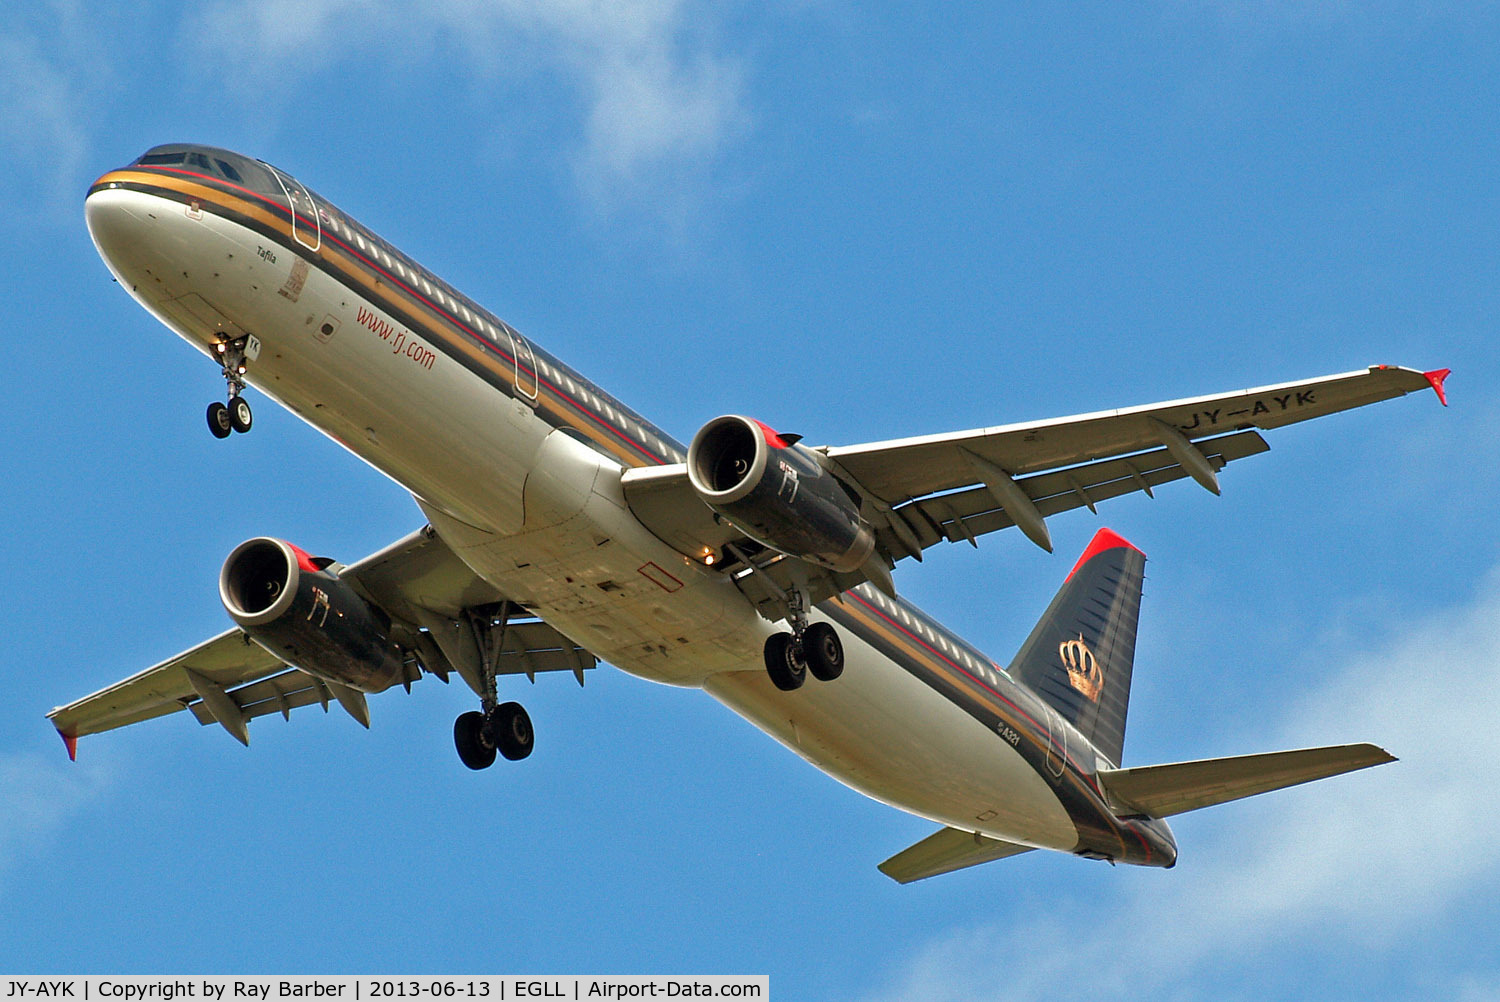 JY-AYK, 2008 Airbus A321-231 C/N 3522, Airbus A321-231 [3522] (Royal Jordanian Airlines) Home~G 13/06/2013. On approach 27R.